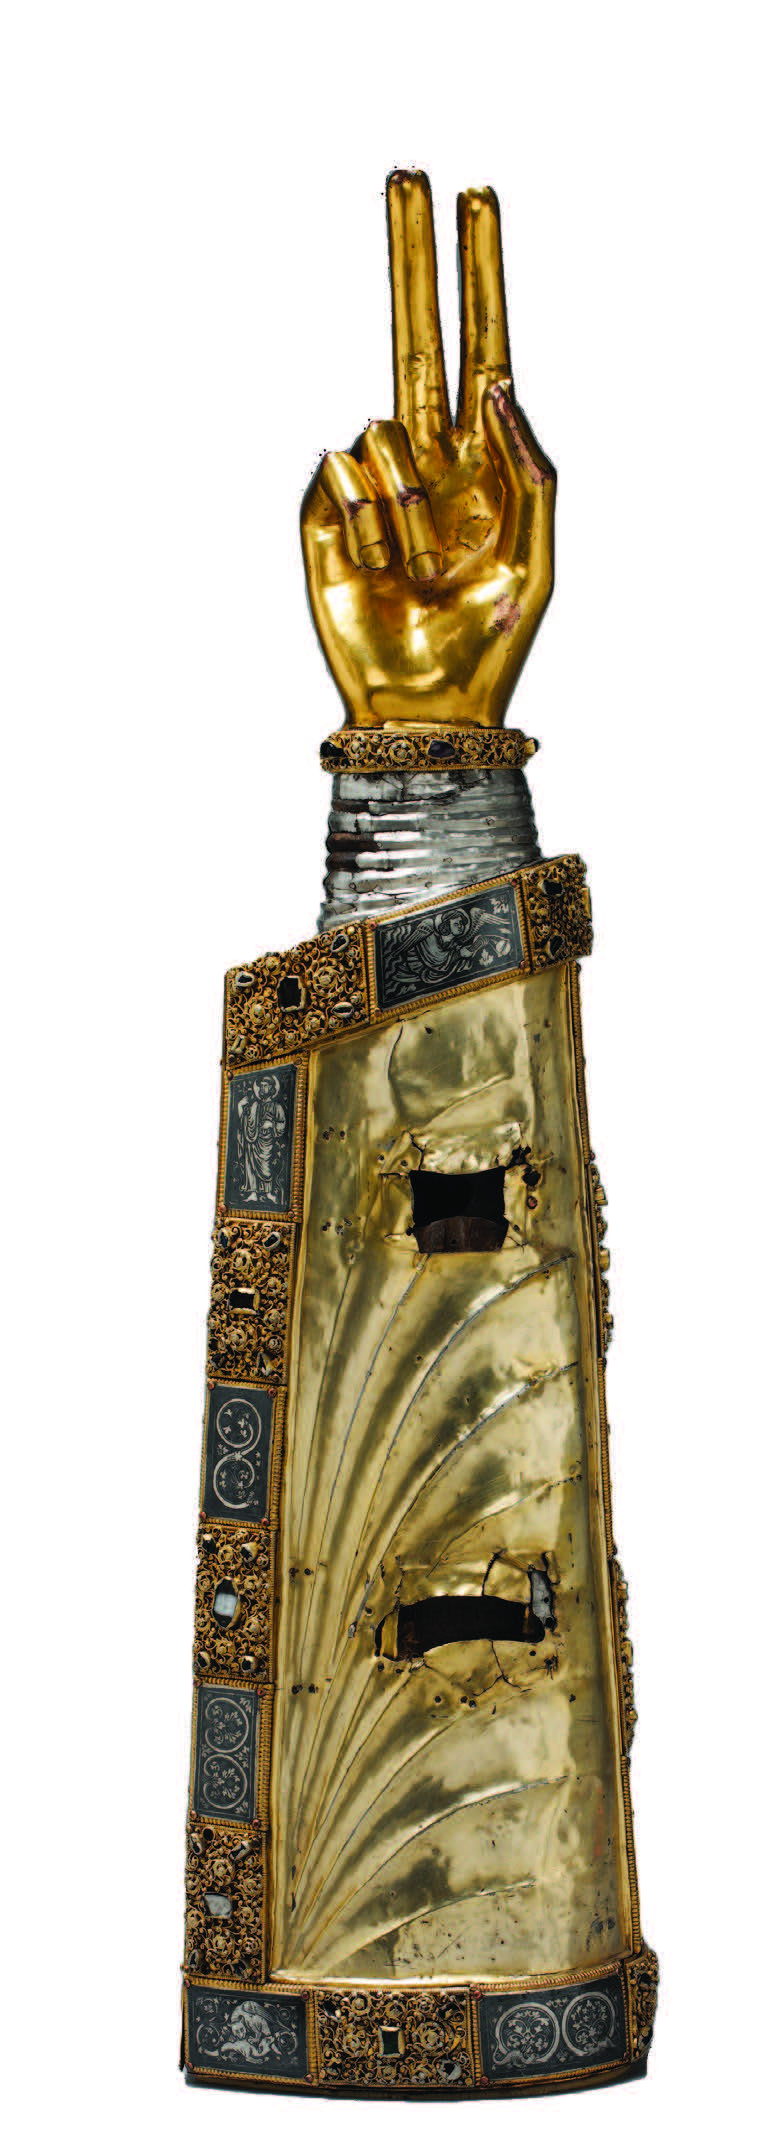 Relics provided a material connection to the presence of holy beings whose spirits were with God. Arm reliquary, ca. 1230. The Metropolitan Museum of Art, New York, The Cloisters Collection, 1947.